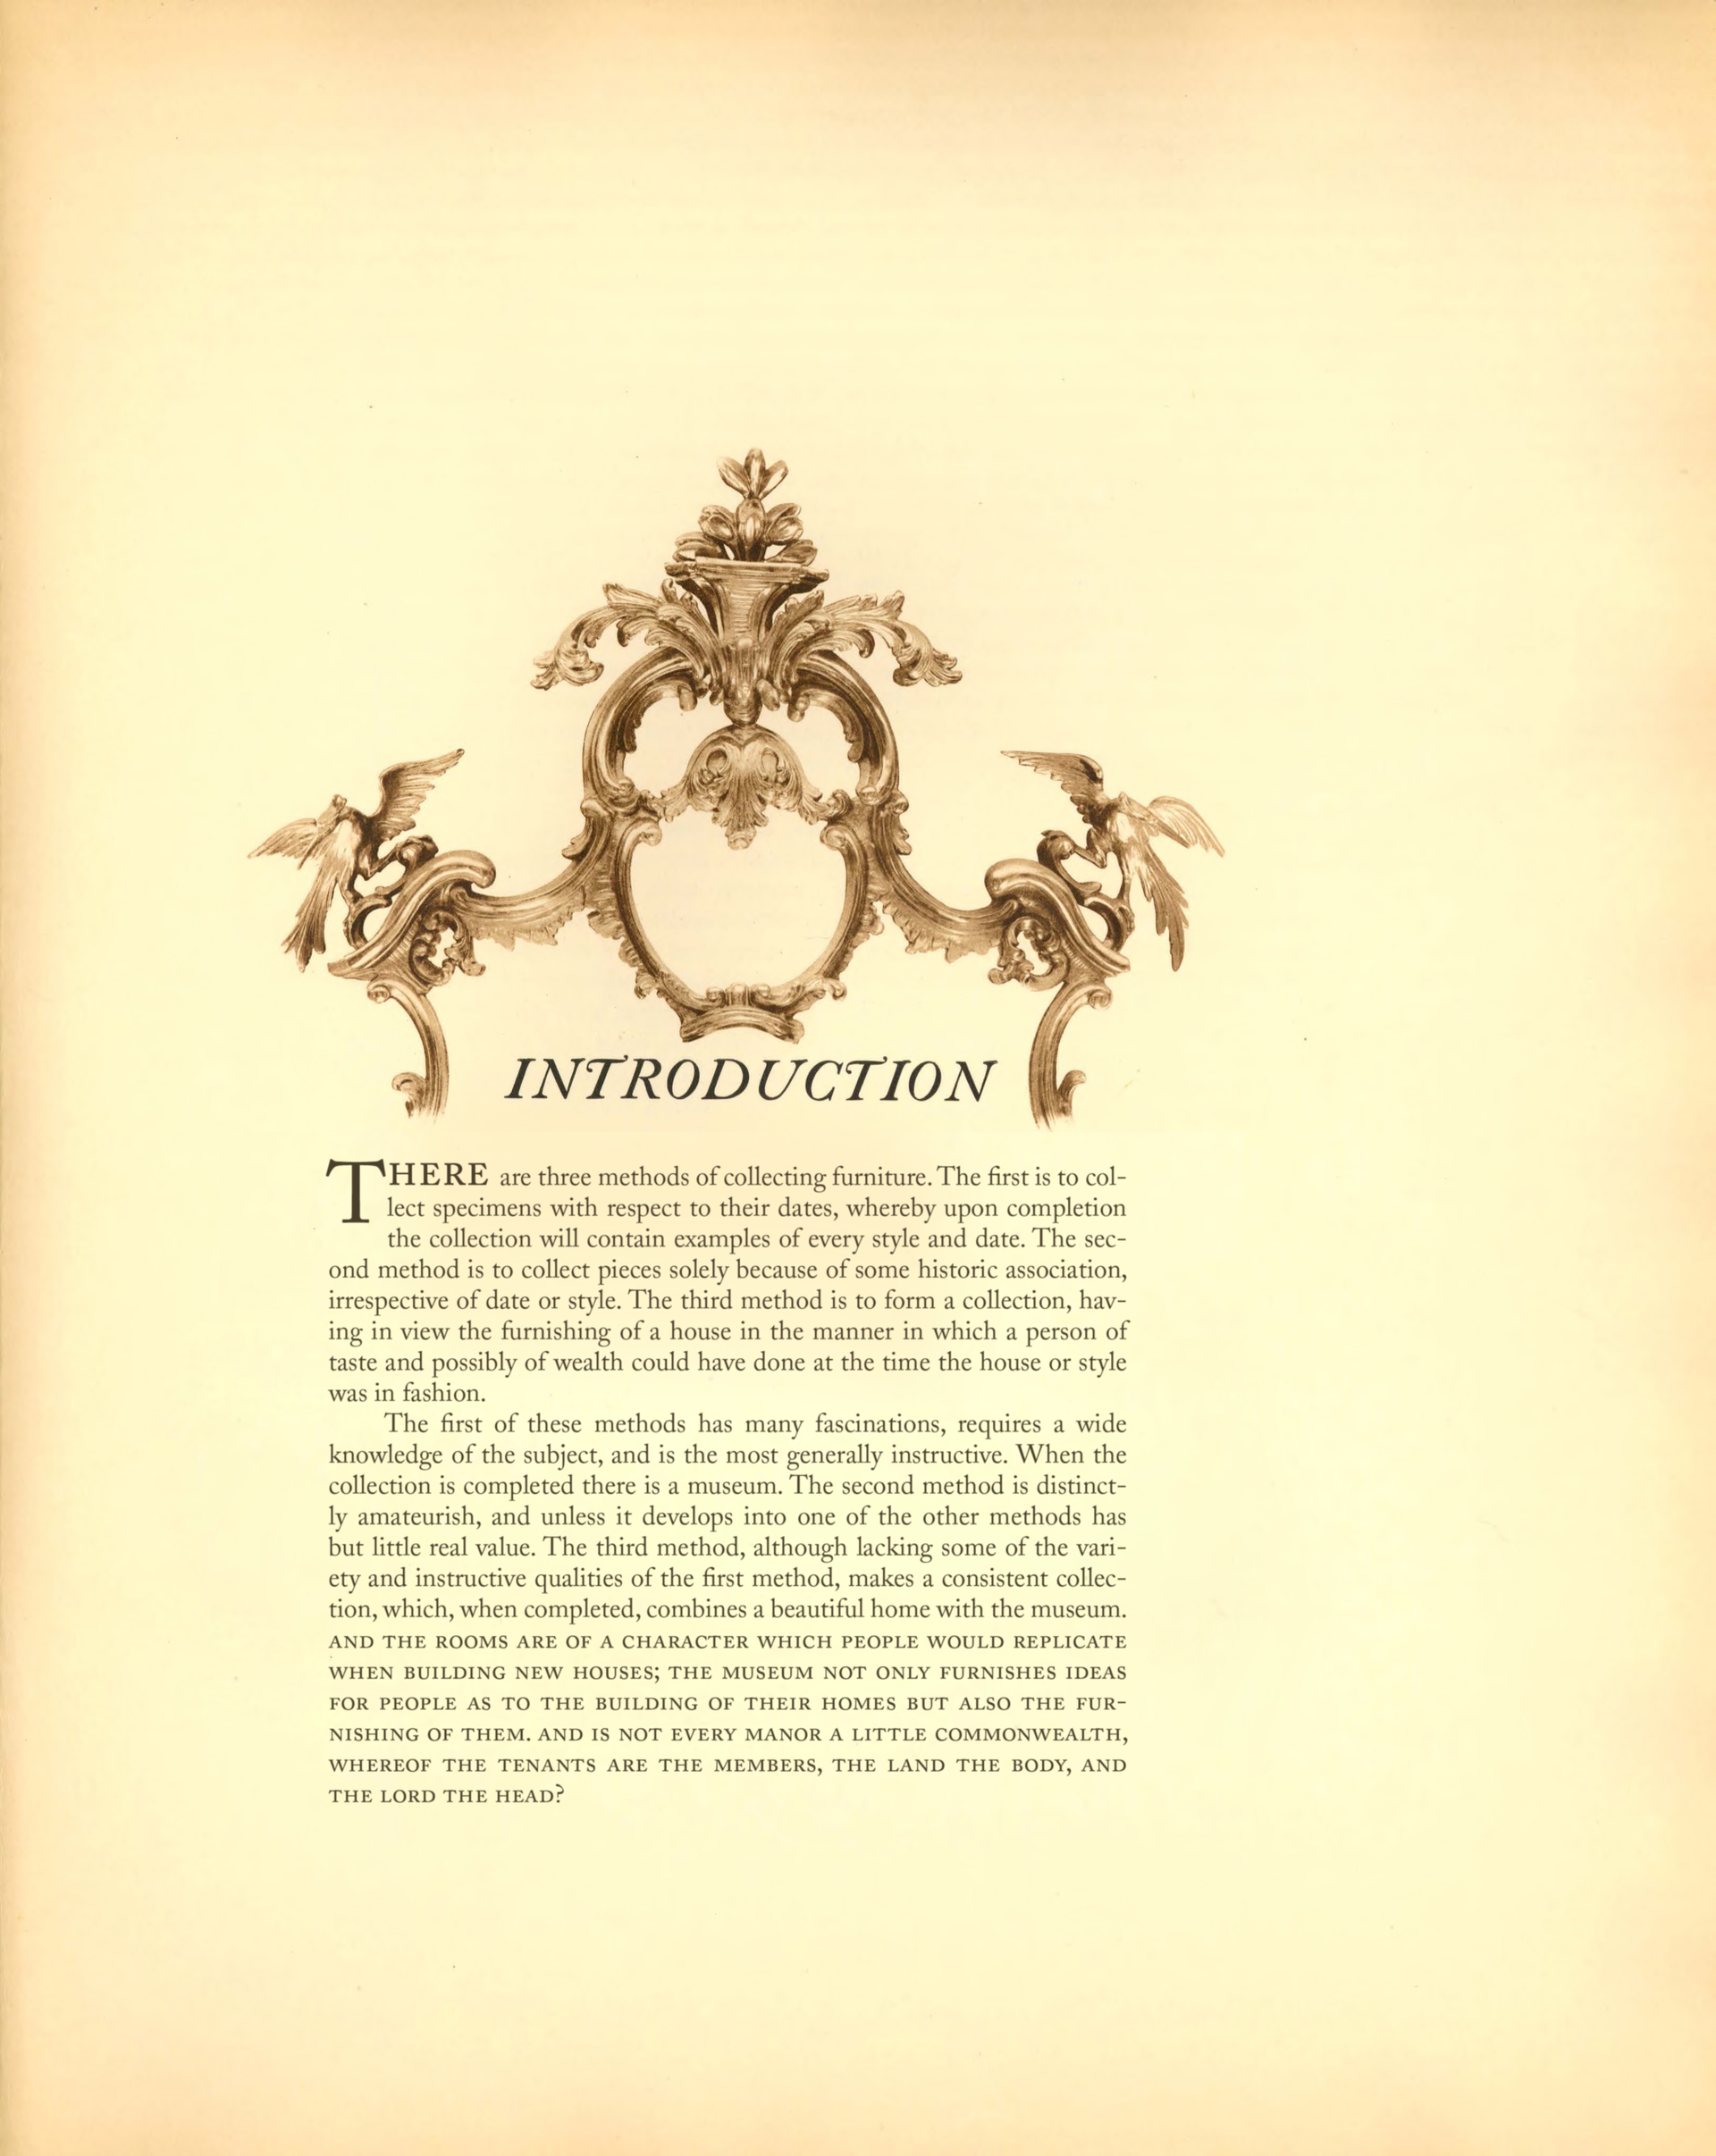 Pendleton Collection Catalog: Ornate photogravure of a frame surrounds the title "Introduction", followed by introductory text